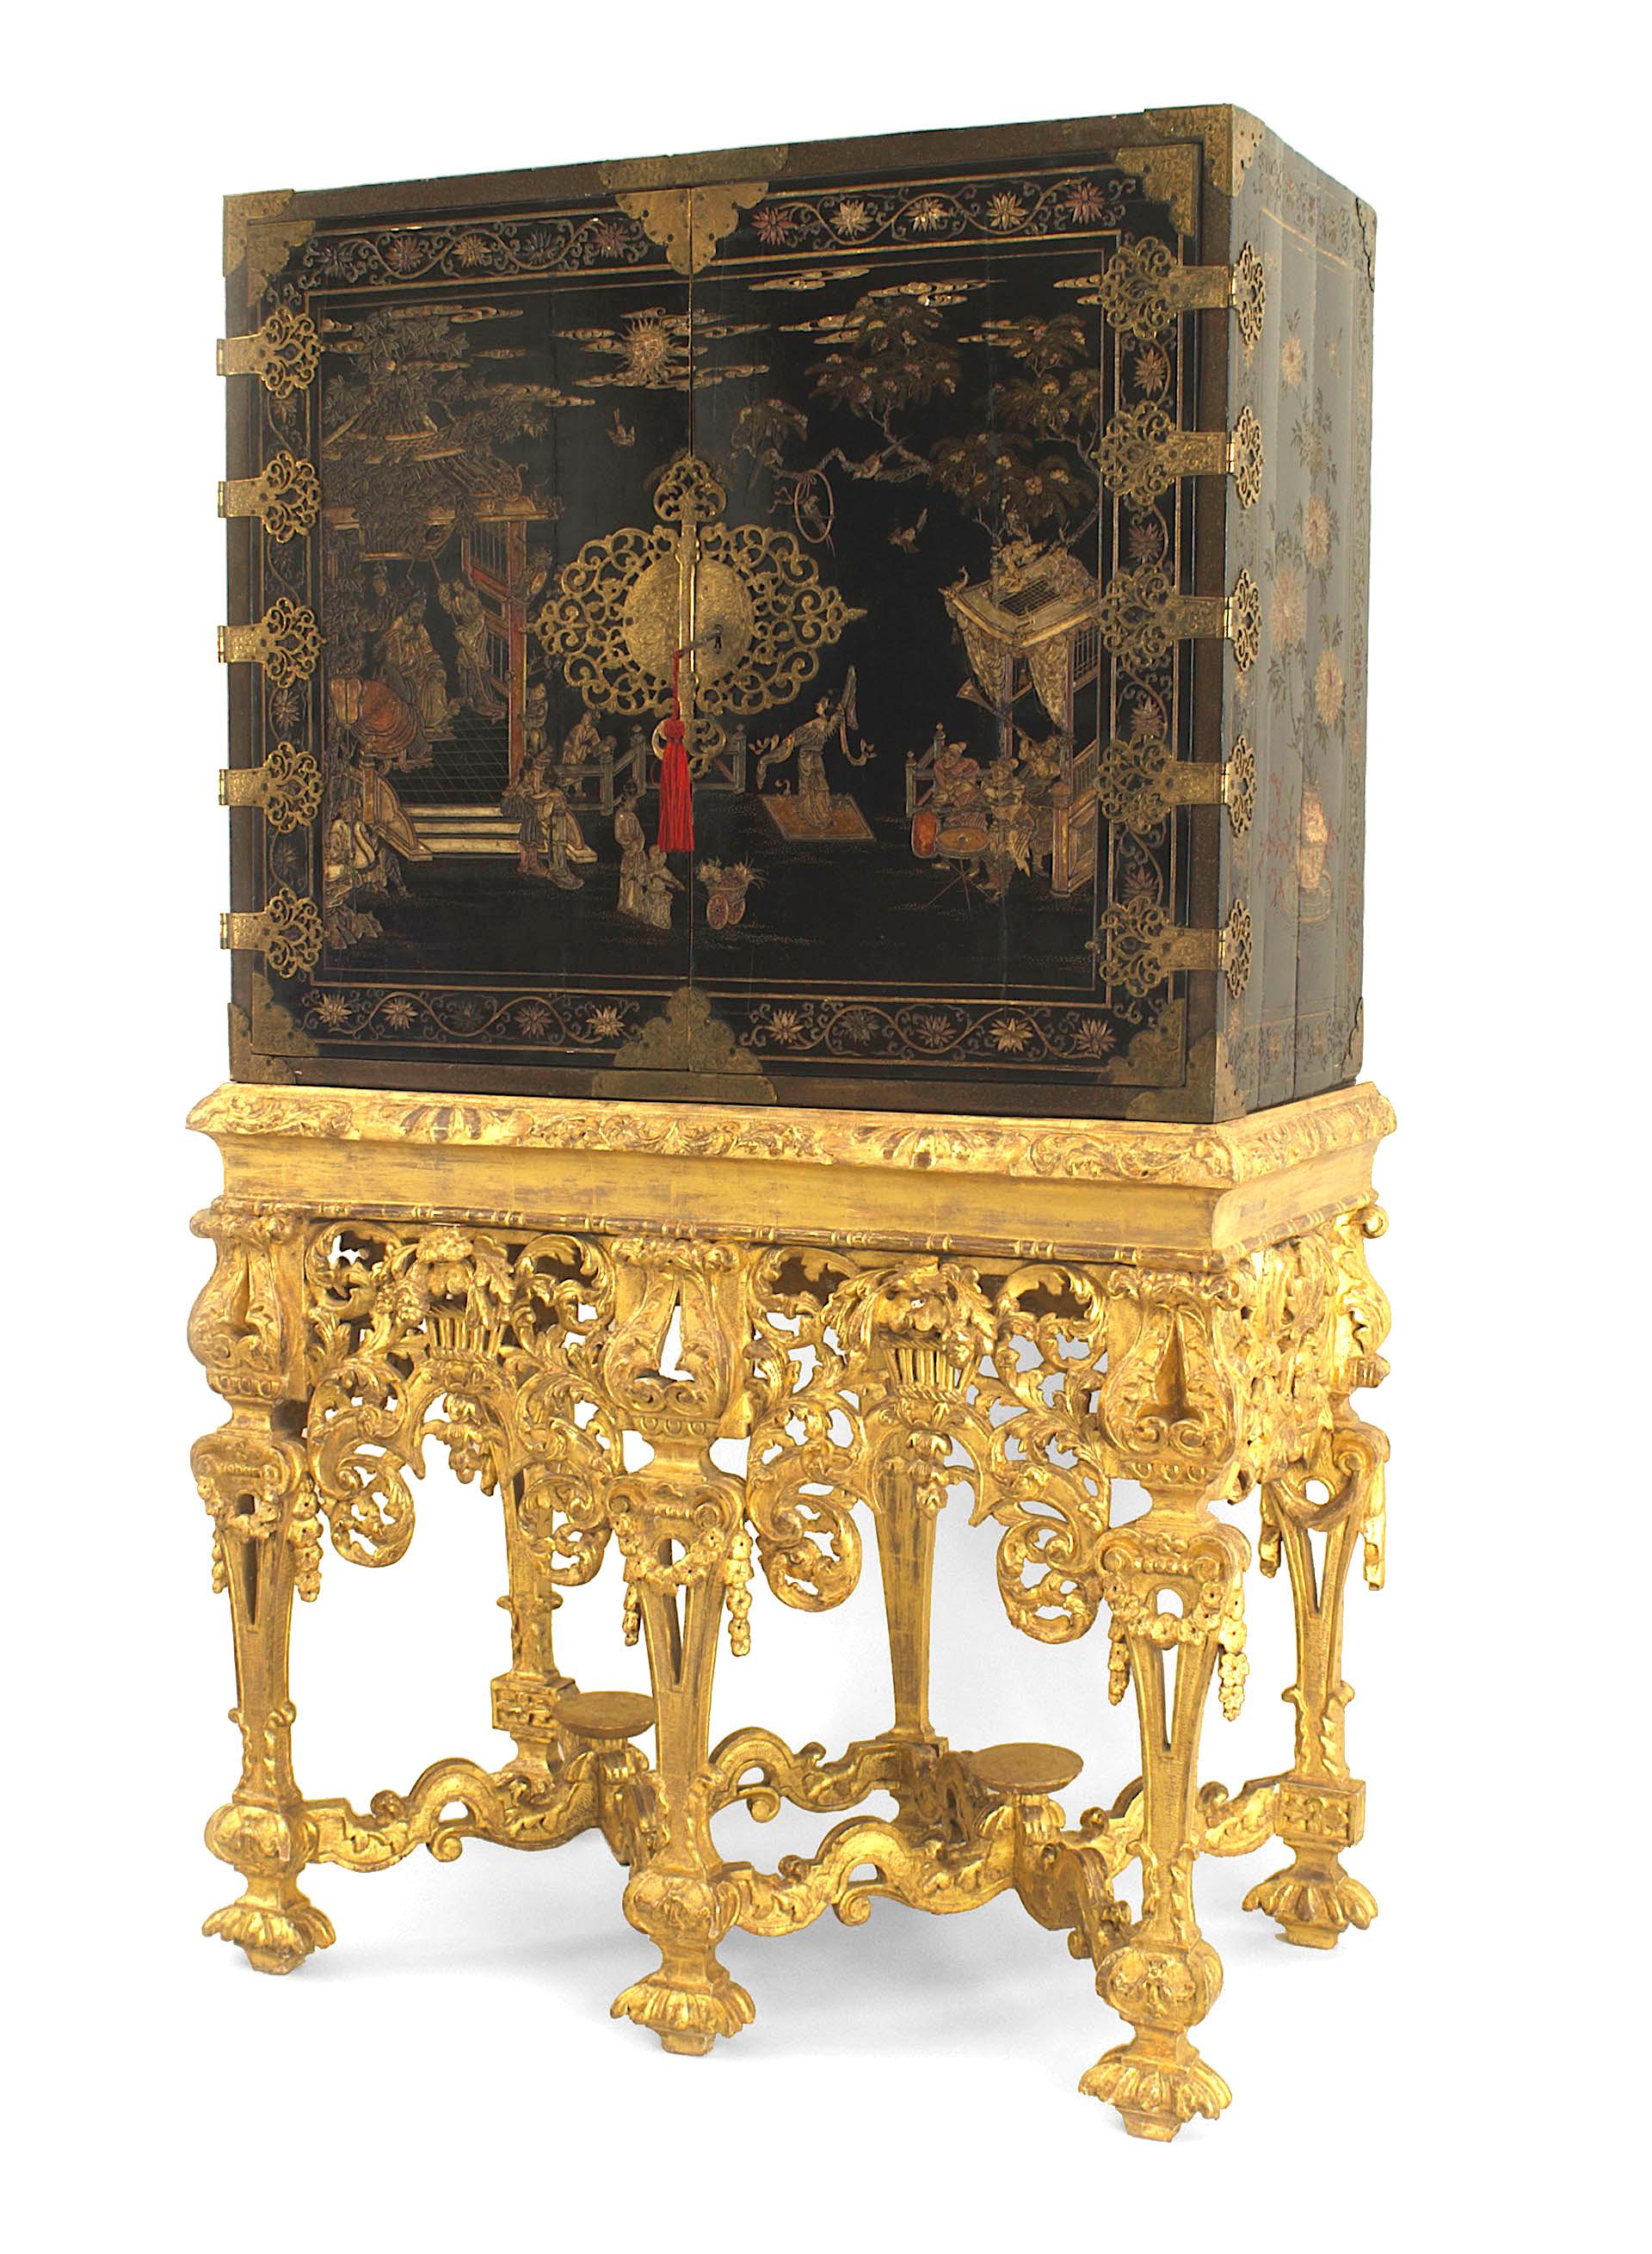 Asian Chinese coromandel lacquer cabinet on an English Charles II gilt-wood Stand (c. 1685) with doors decorated with court scenes & pierced metal foliate engraved hinges & lock plates and 11 interior decorated drawers

Provenance: The 2nd Viscount